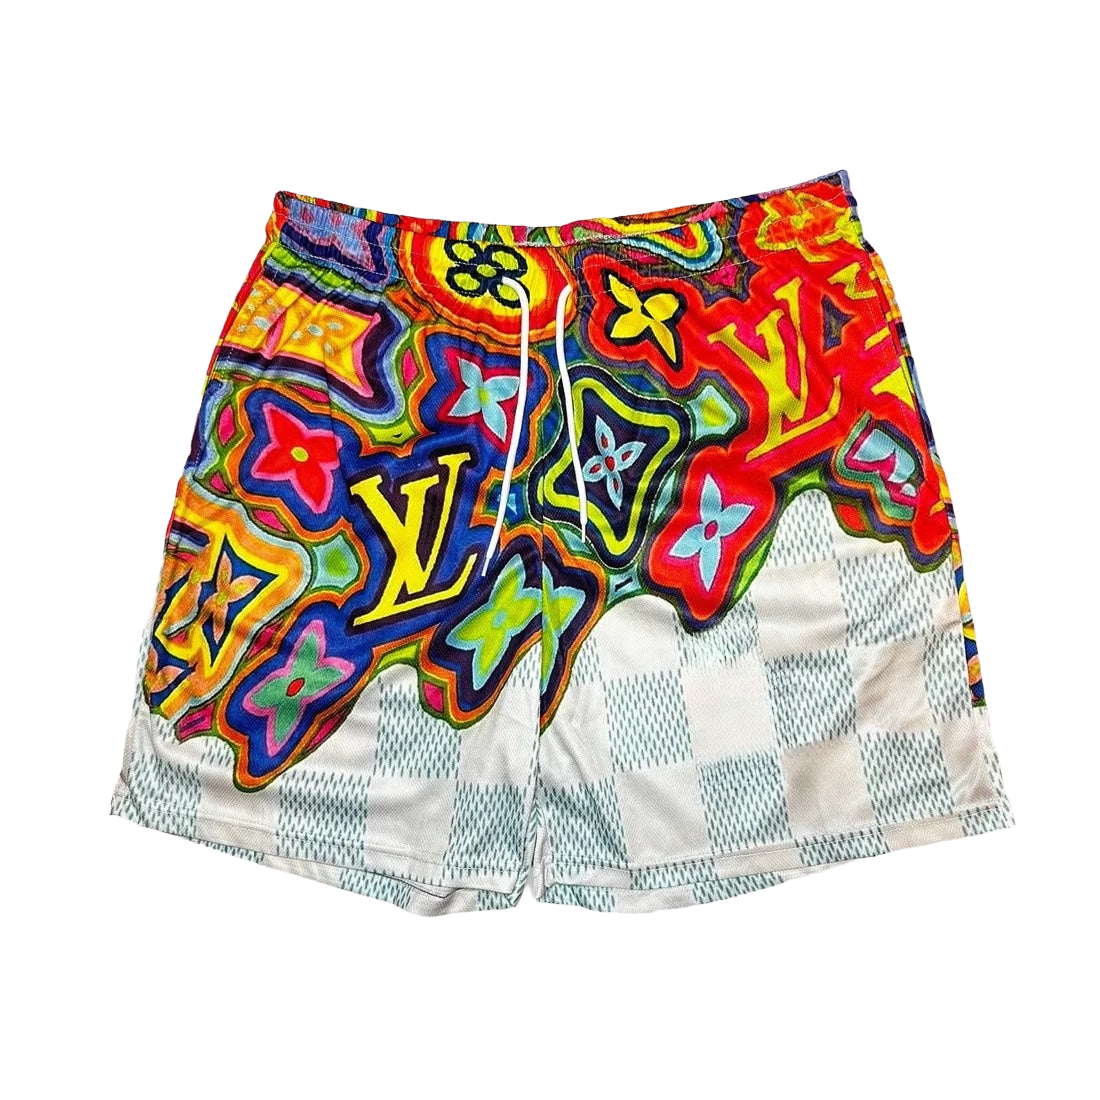 a pair of colorful shorts on a black background